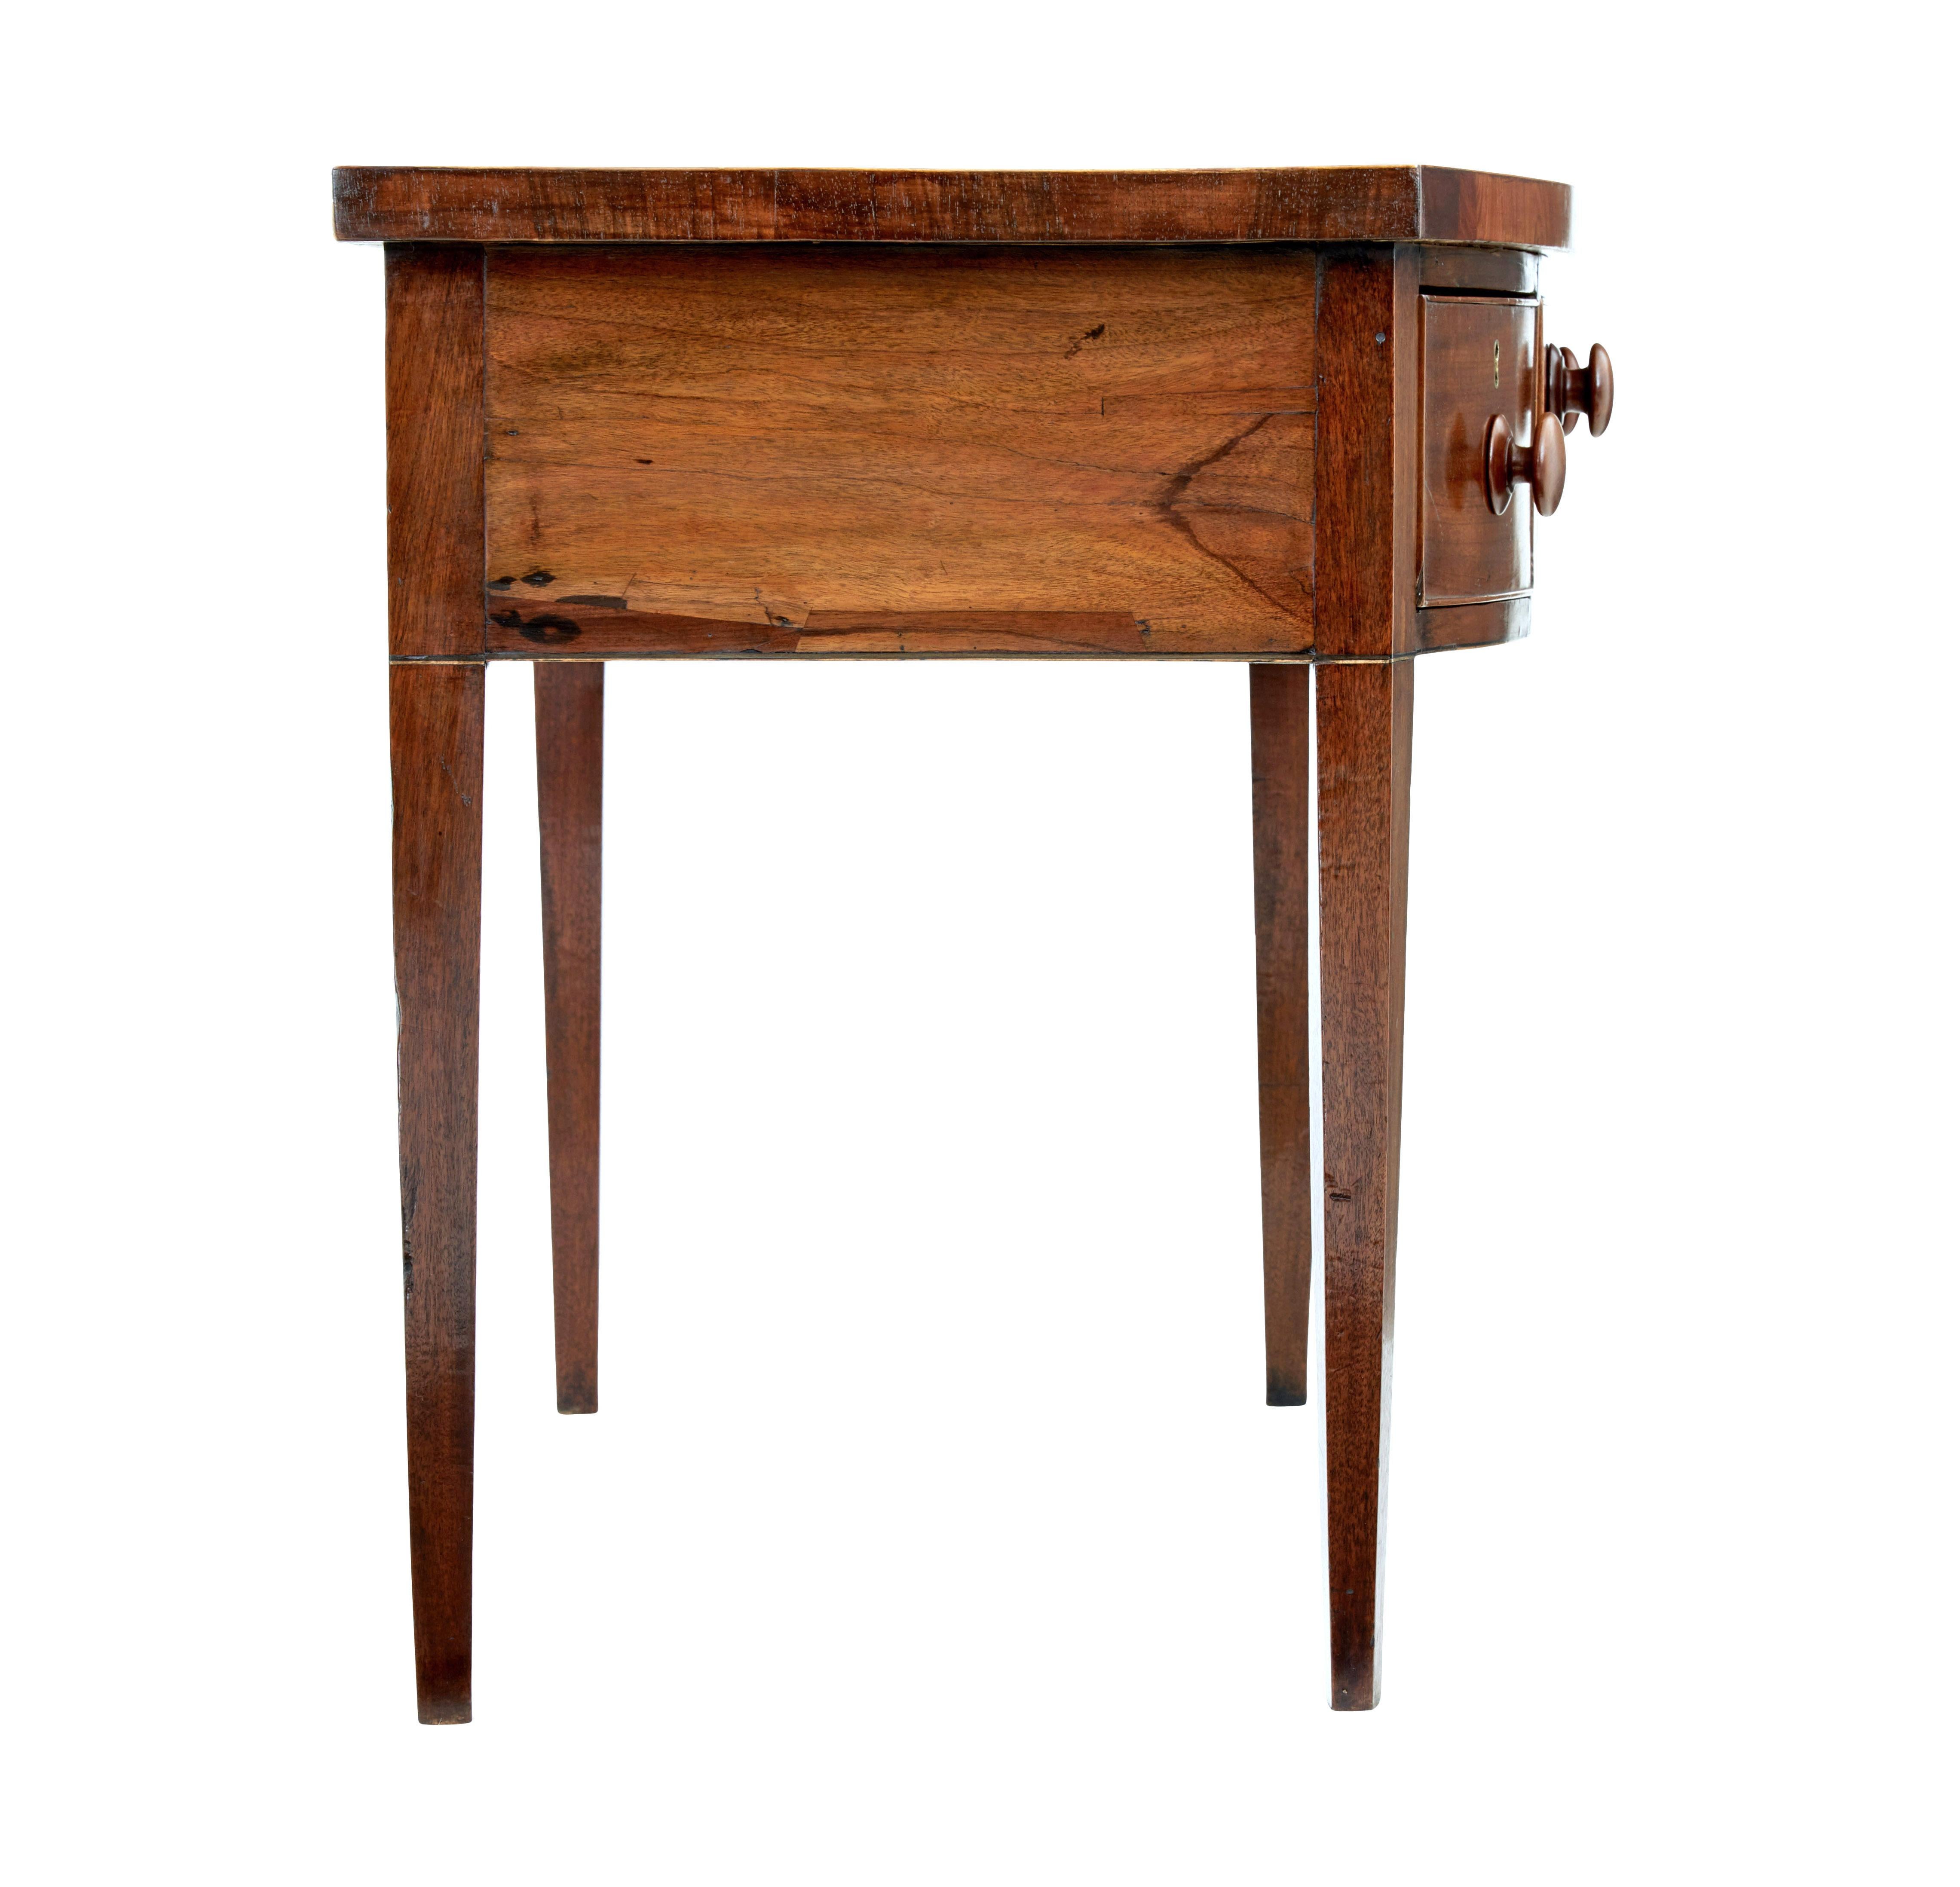 Hand-Crafted Mid 19th century mahogany bowfront sideboard